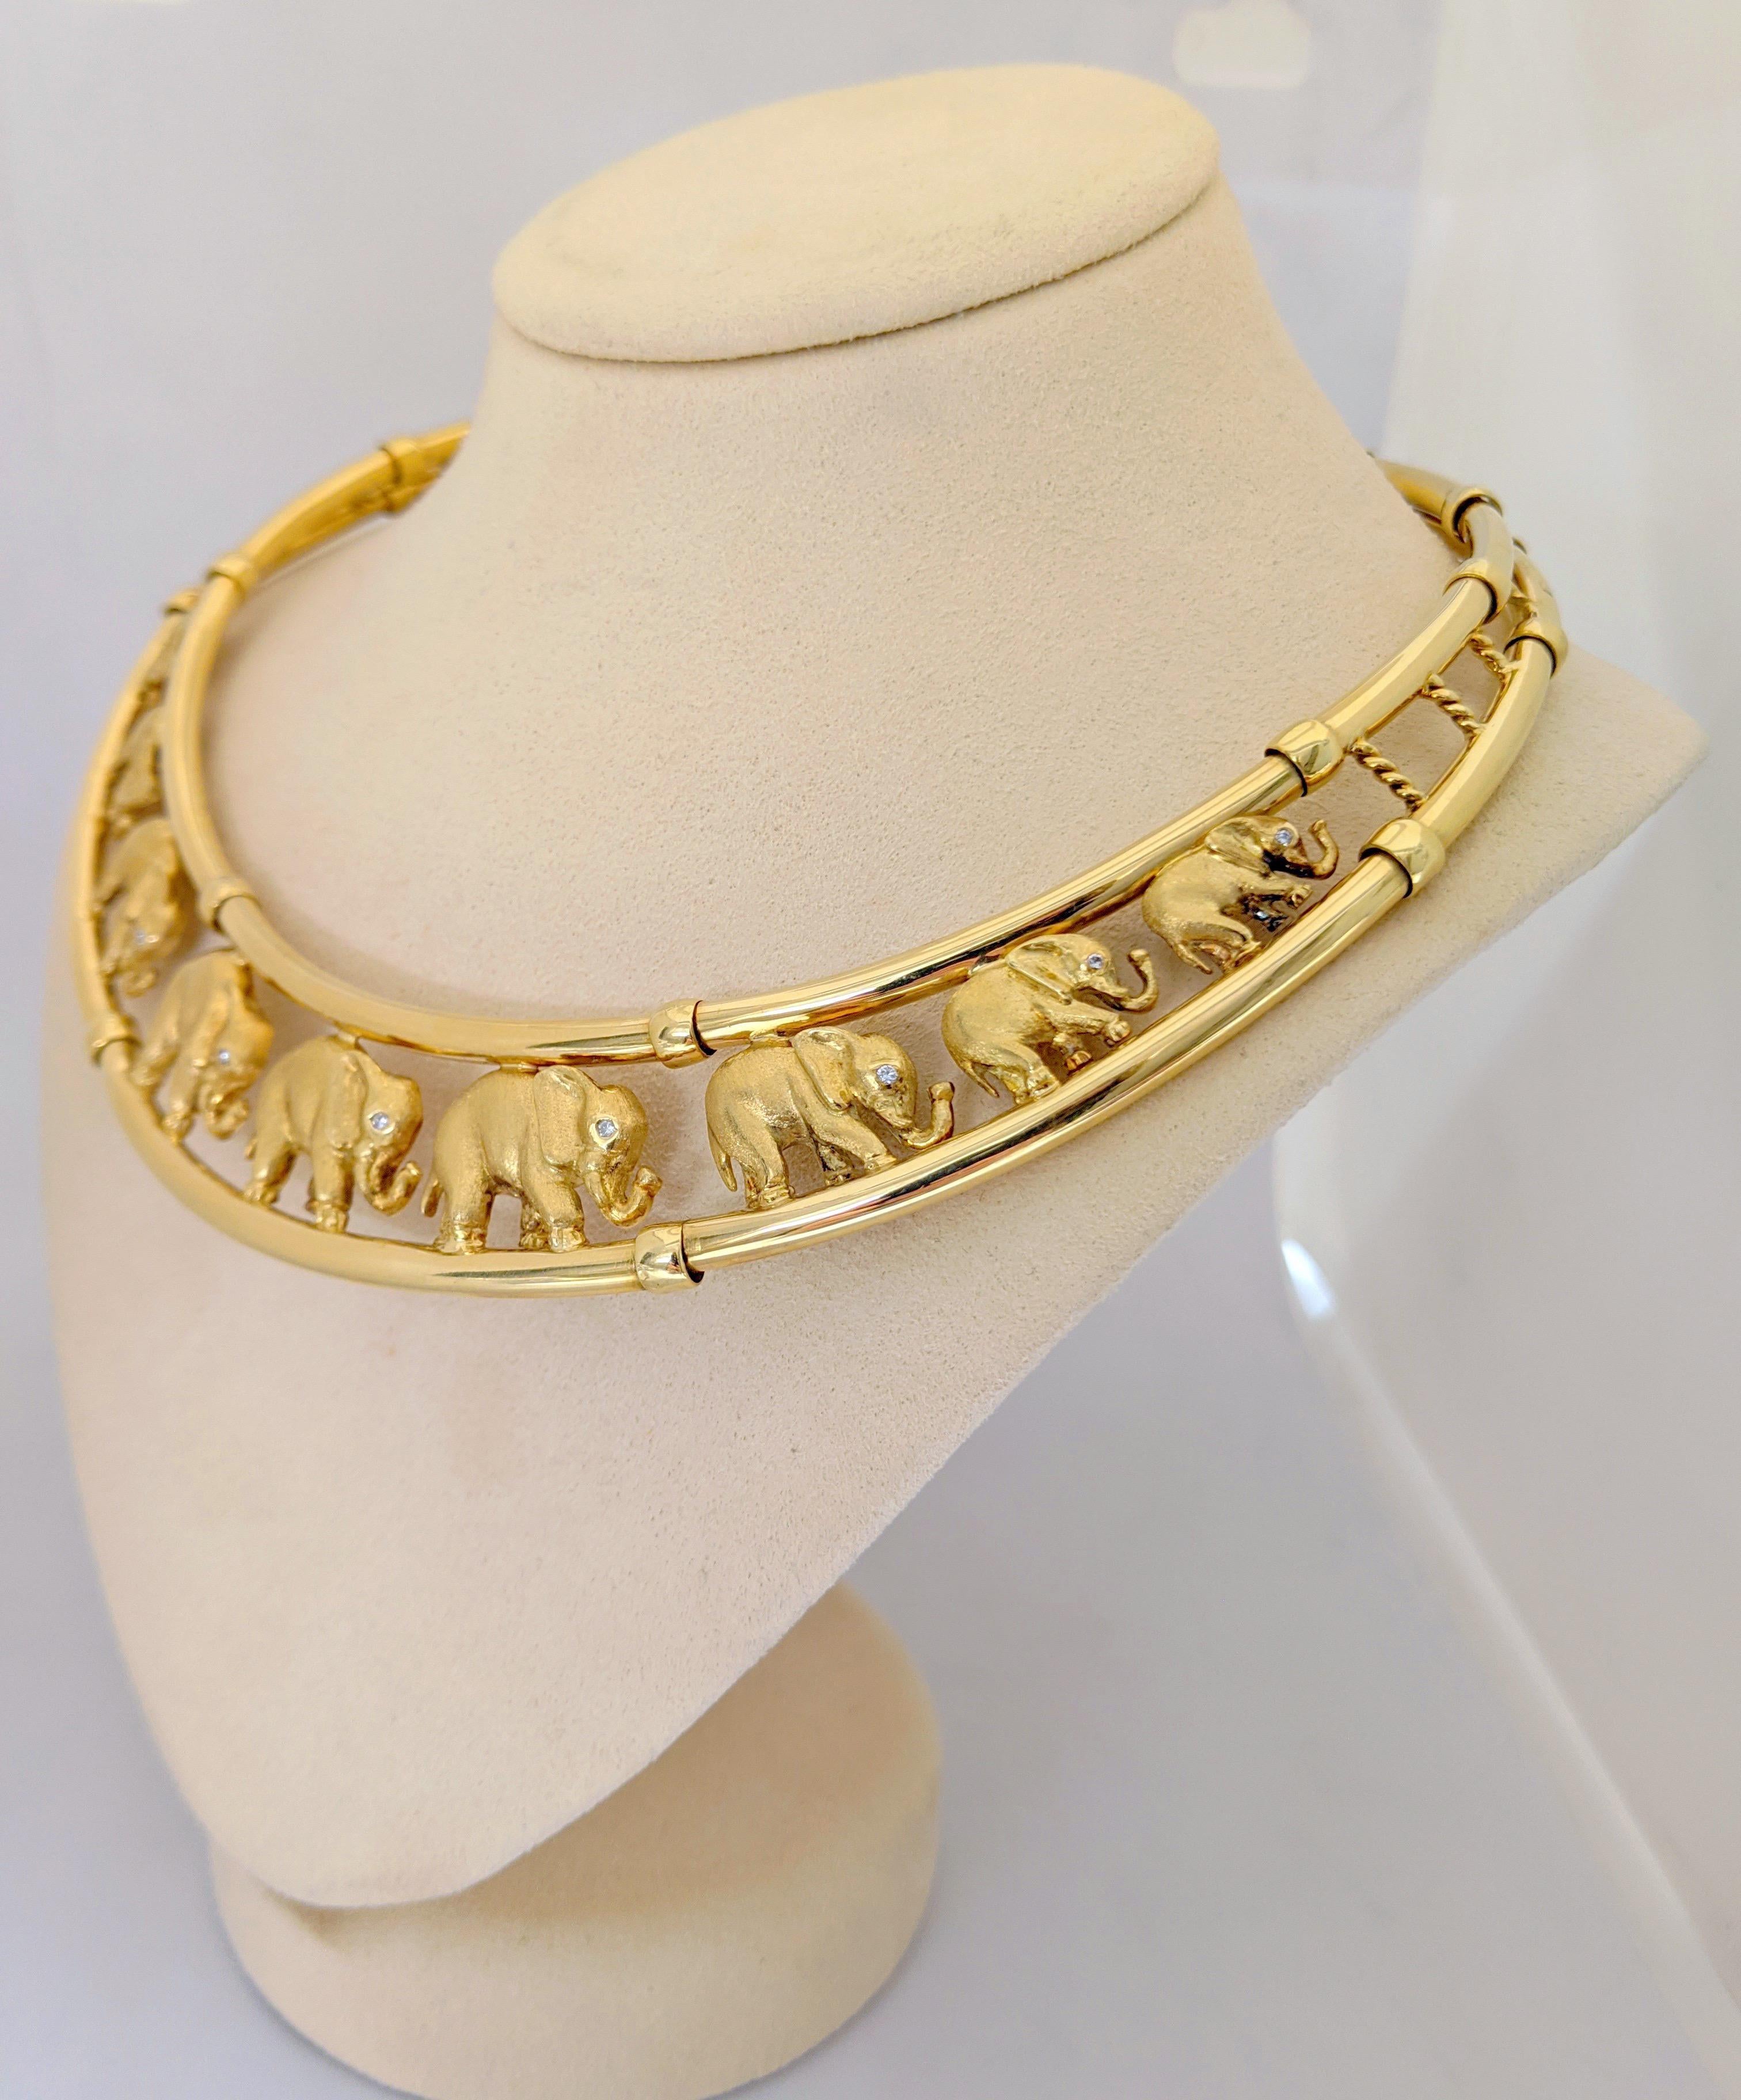 Women's or Men's Roberto Coin 18 Karat Yellow Gold Vintage Collar Necklace with 9 Elephants